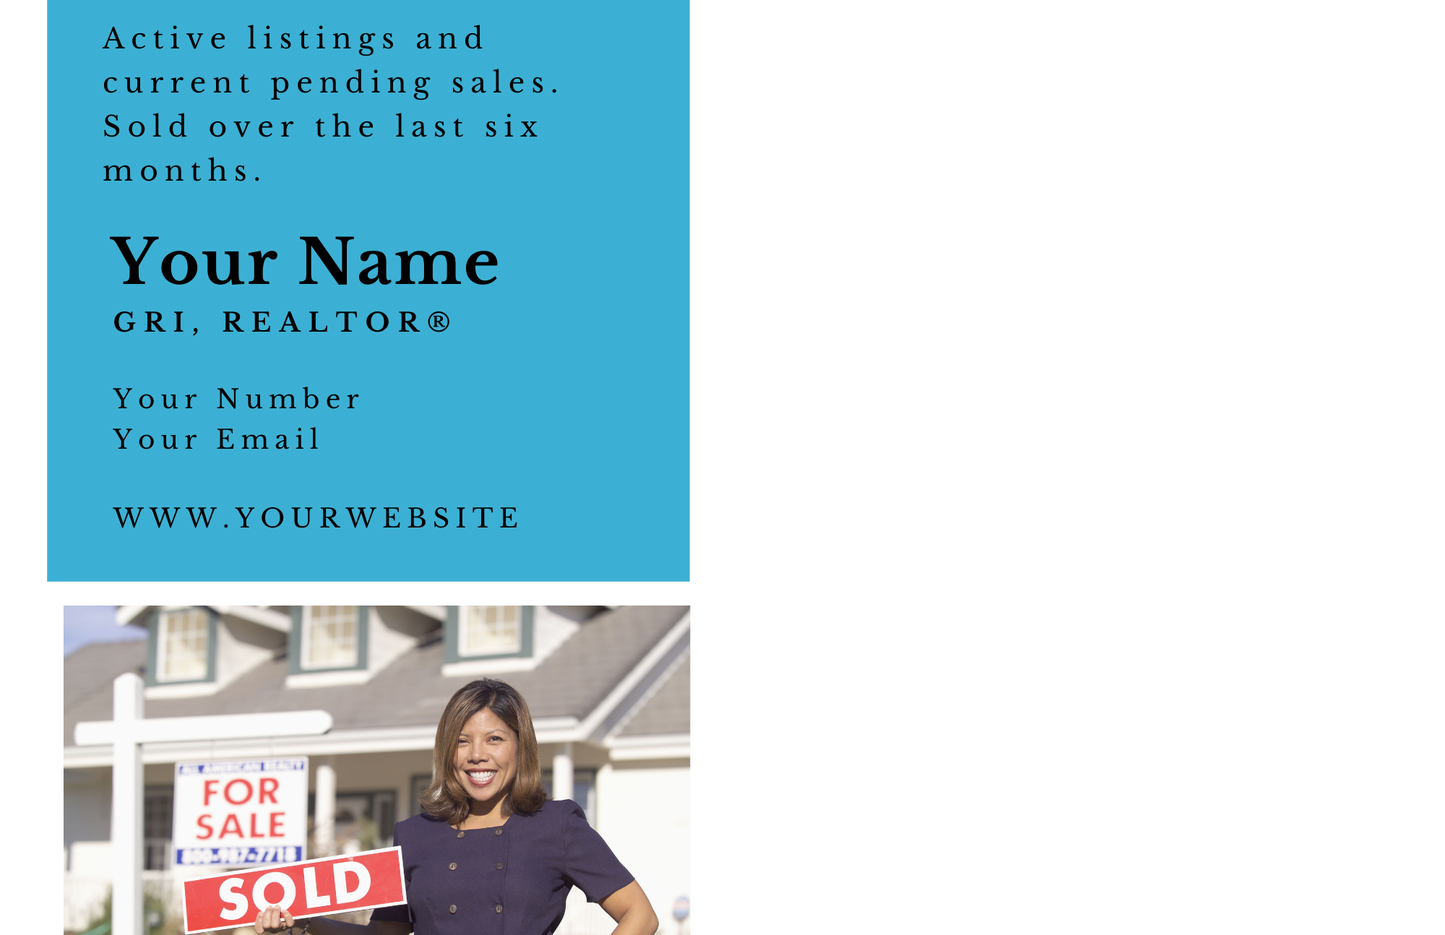 Sherri Smith provides custom postcard mailings for real estate brokers, agents, investors, property managers, and small business owners nationwide at SherriFowler.com